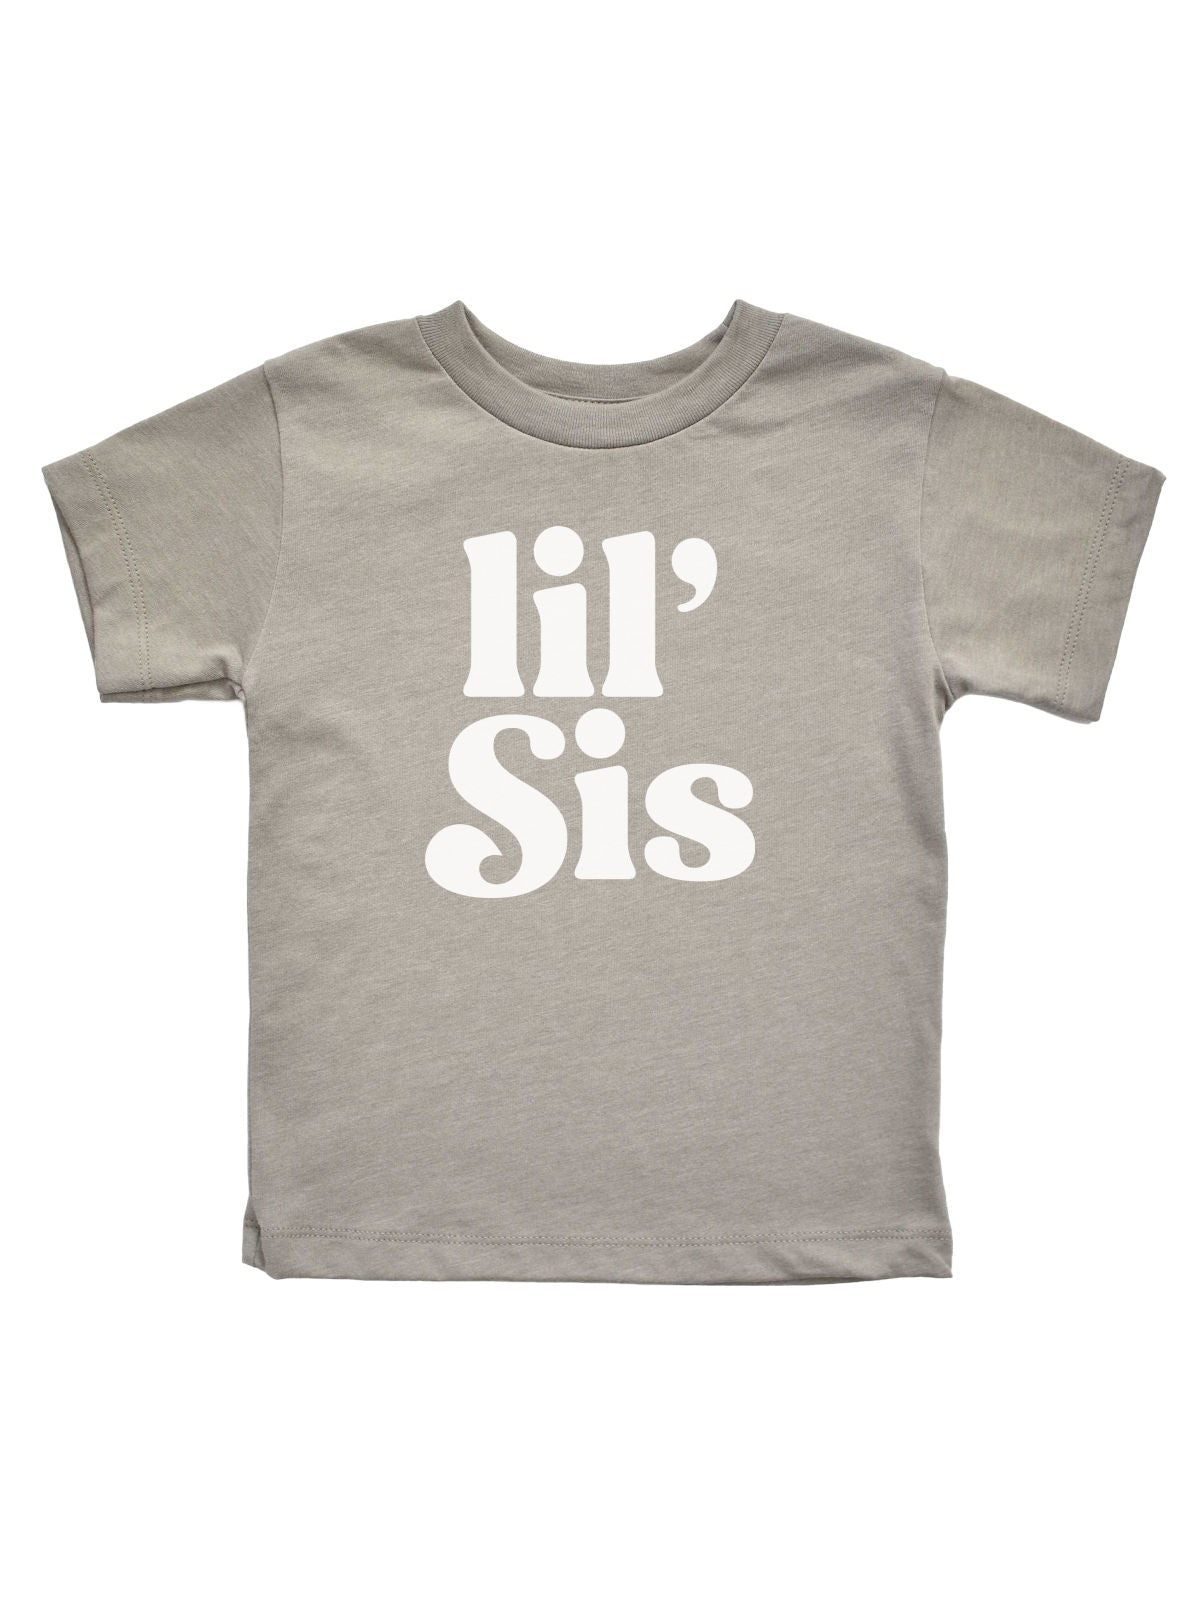 Lil Sis Girls Shirt in Stone